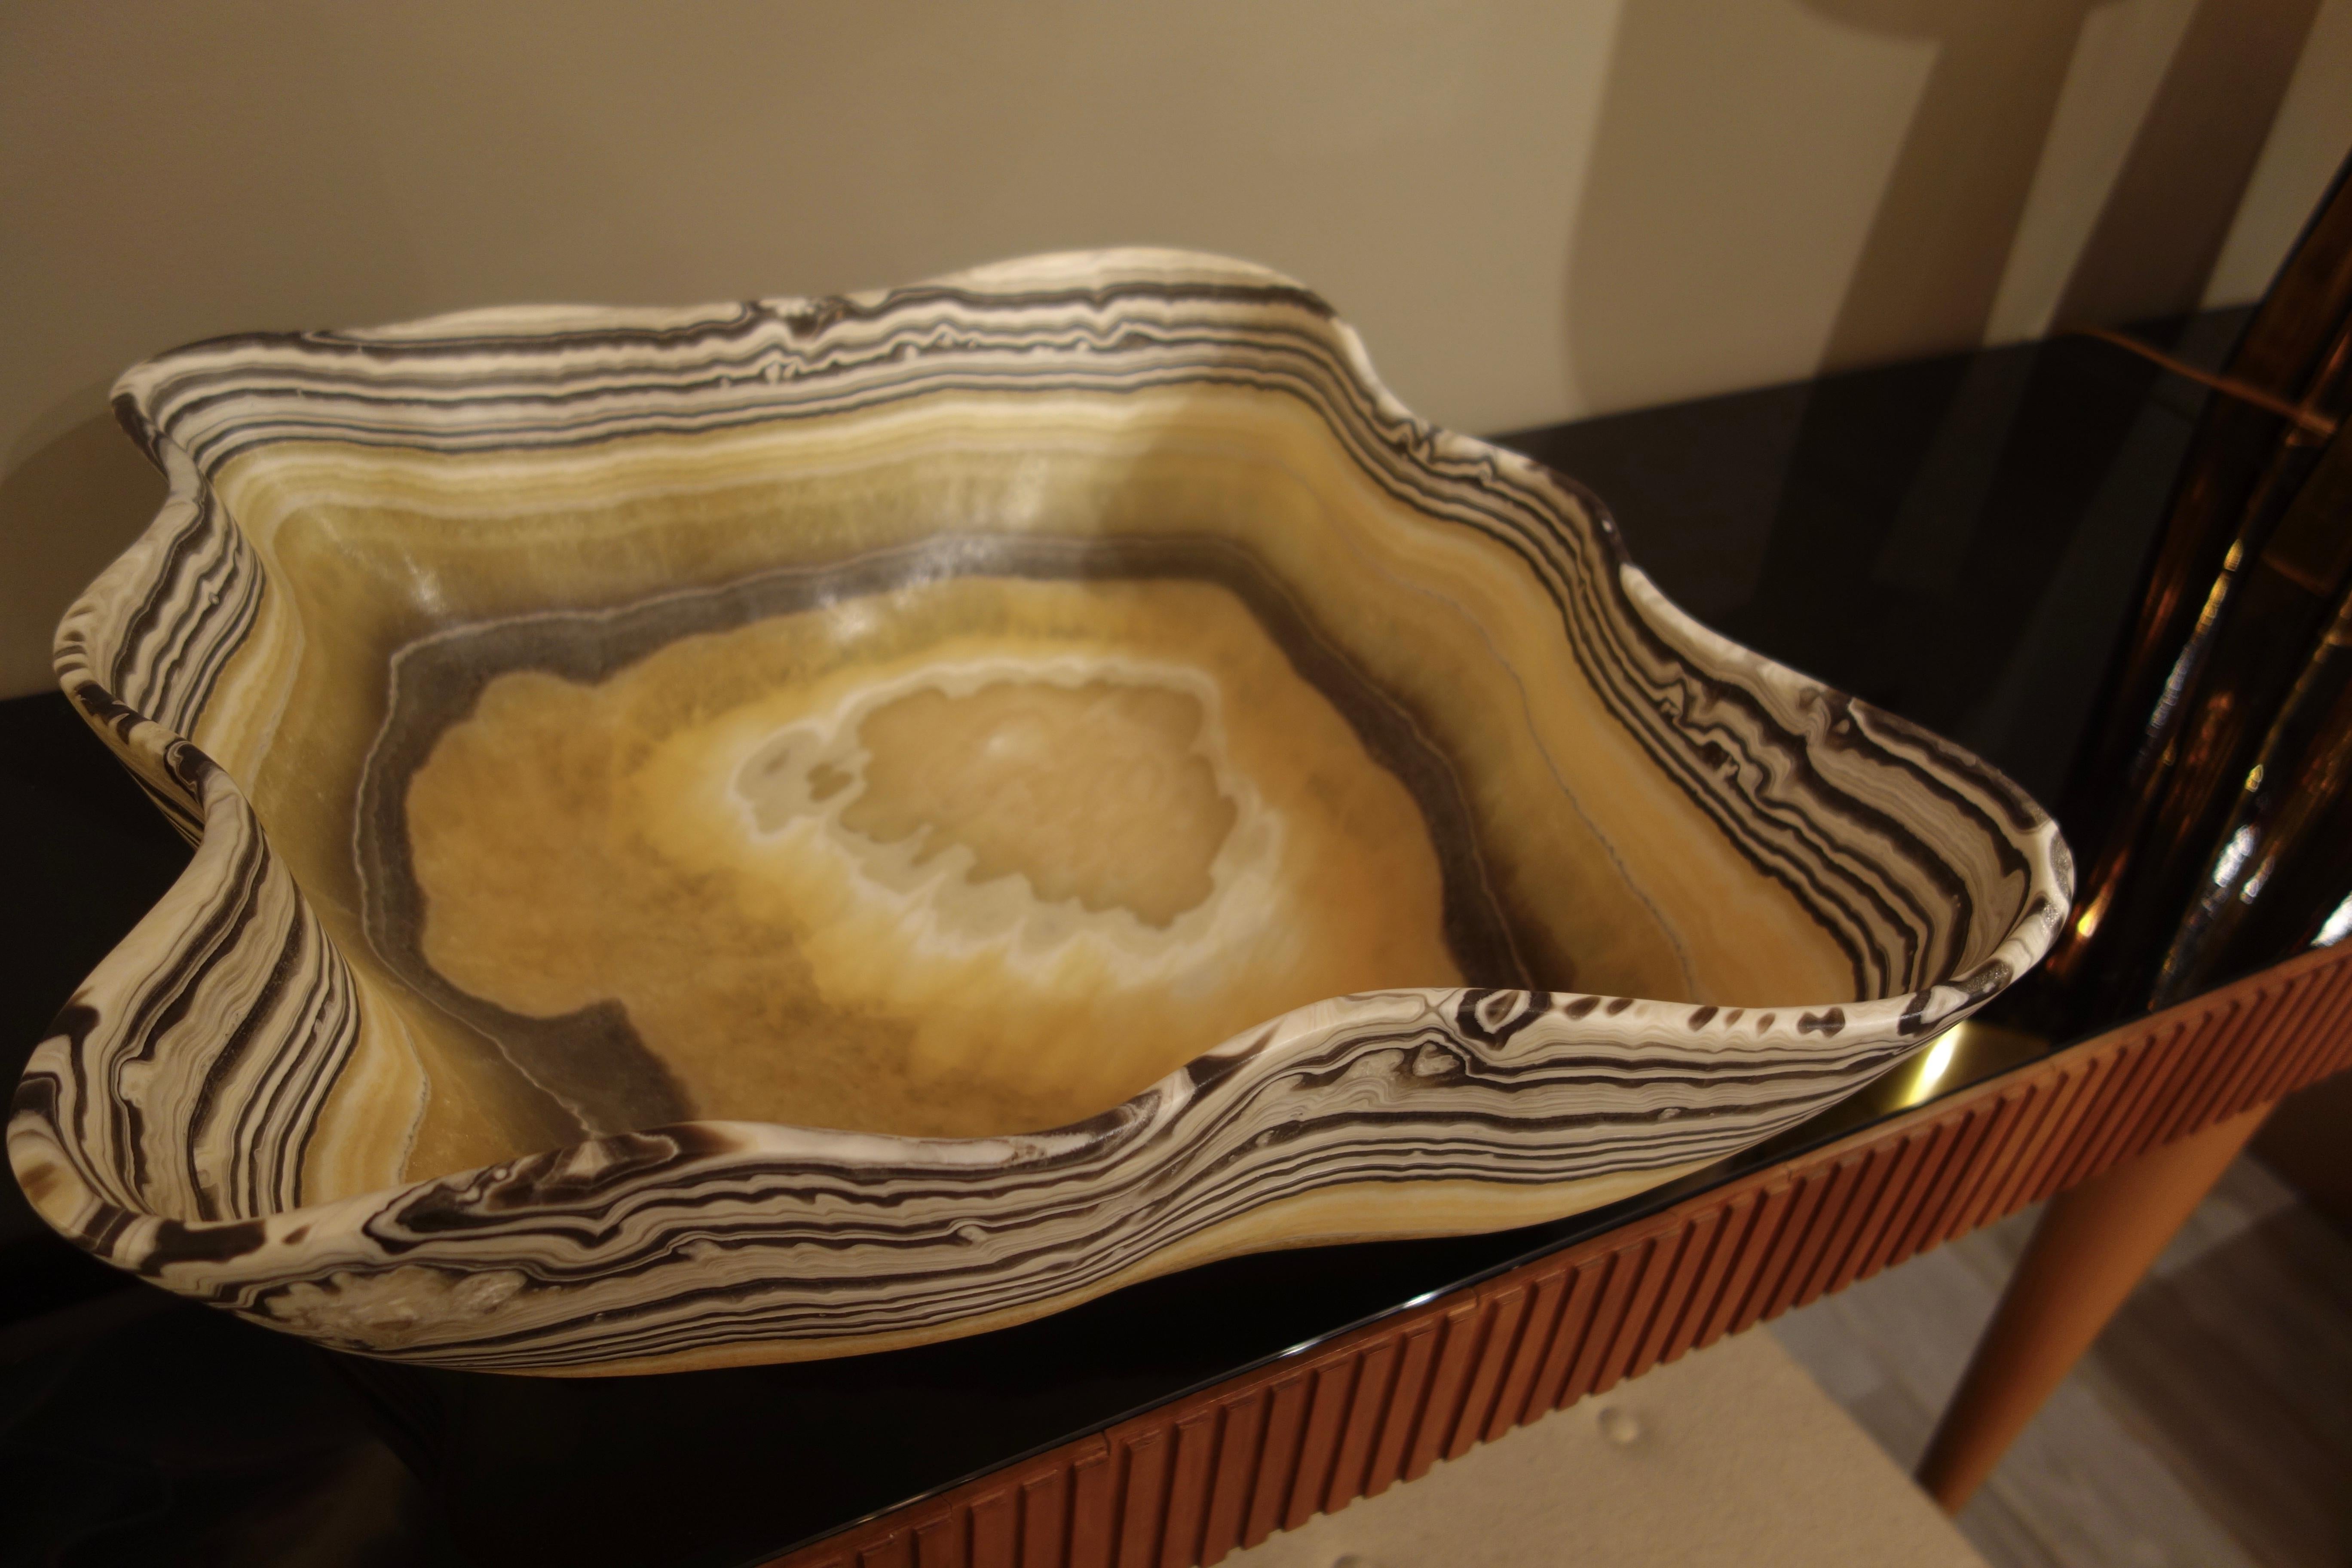 Post-Modern Large Hand Carved Onyx Bowl or Centerpiece in Gold, Gray and White